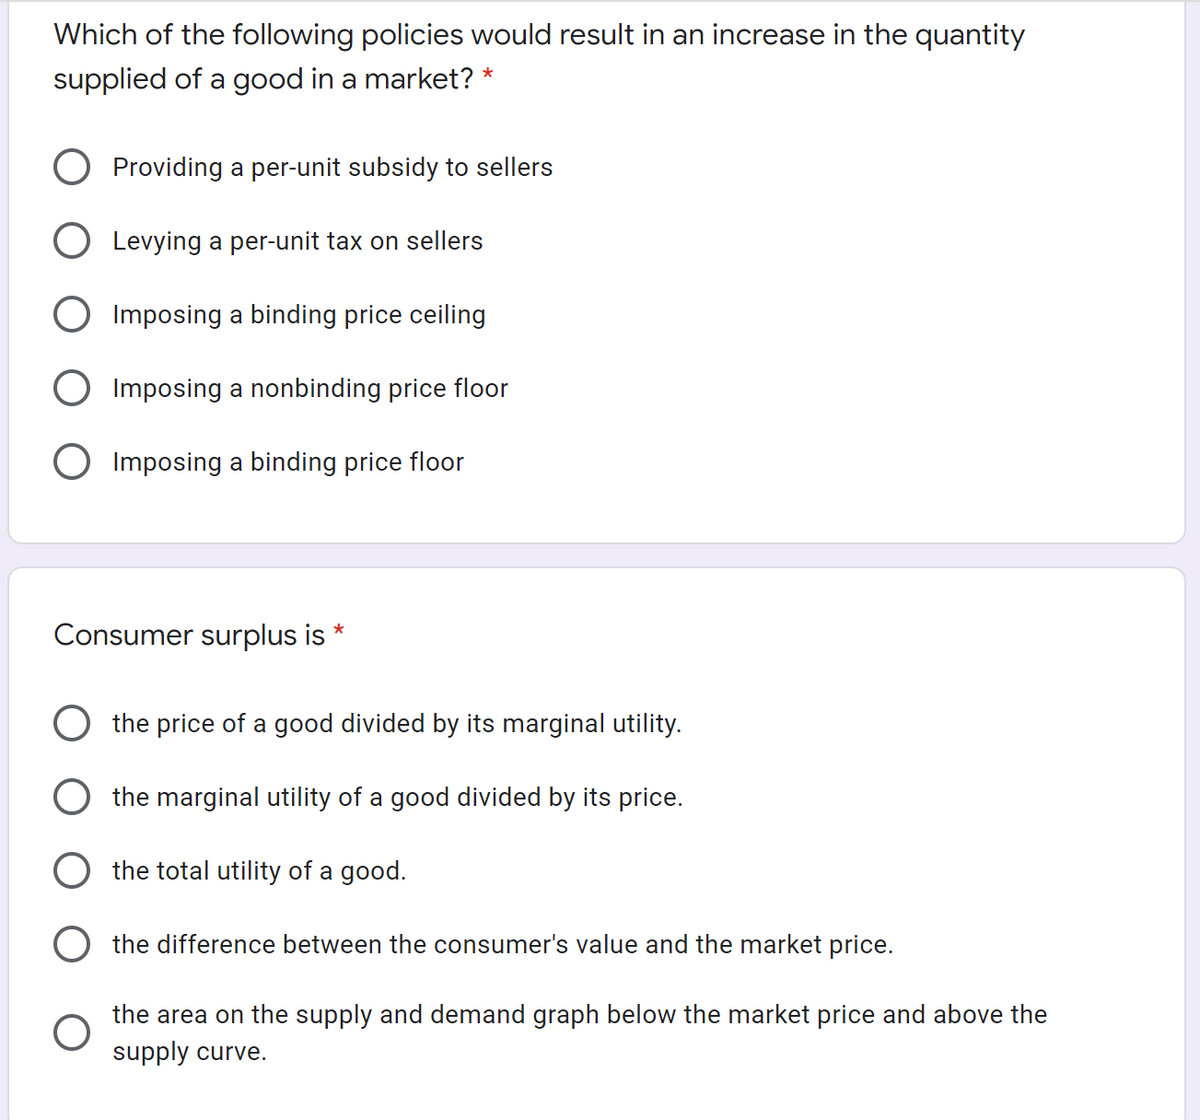 Which of the following policies would result in an increase in the quantity
supplied of a good in a market? *
O Providing a per-unit subsidy to sellers
O Levying a per-unit tax on sellers
O Imposing a binding price ceiling
O Imposing a nonbinding price floor
O Imposing a binding price floor
Consumer surplus is
O the price of a good divided by its marginal utility.
O the marginal utility of a good divided by its price.
the total utility of a good.
the difference between the consumer's value and the market price.
the area on the supply and demand graph below the market price and above the
supply curve.
